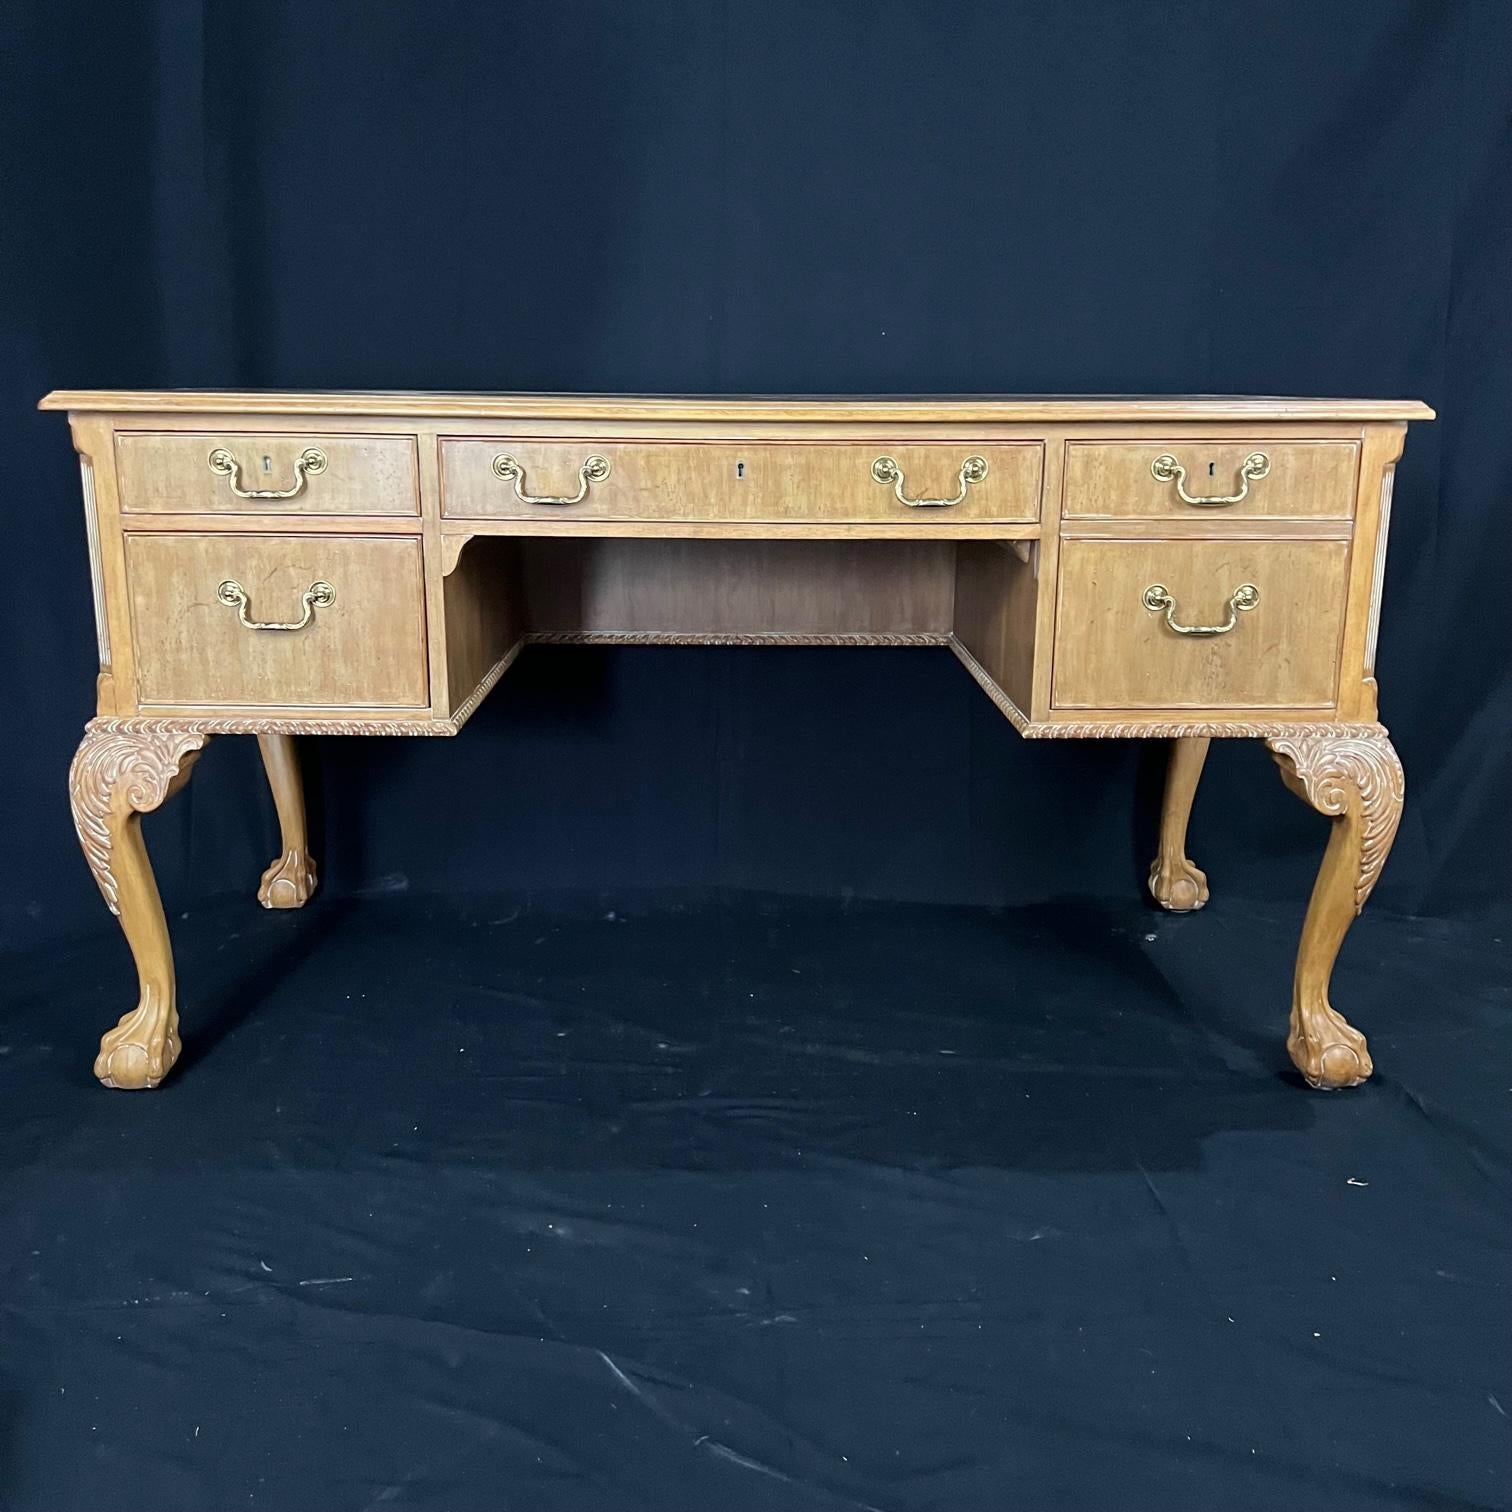 English Chippendale style bleached walnut ball & claw carved executive writing desk having rope carved edge, solid wood construction, beautiful light wood patina, finished back, and five drawers. The legs are long, elegant carved cabriolet legs with